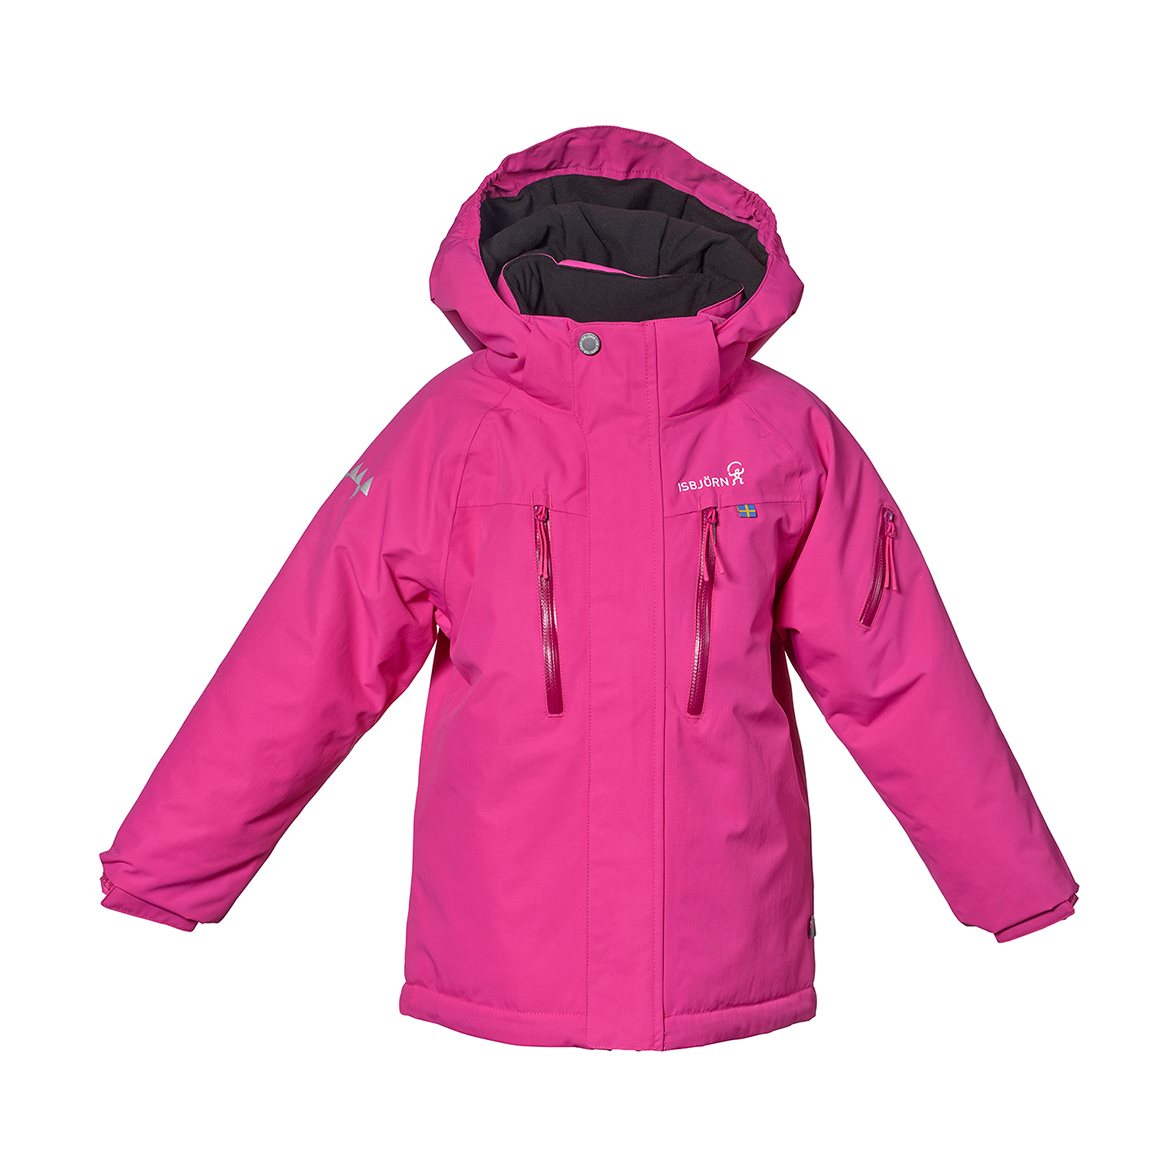 HELICOPTER Winter Jacket Kids